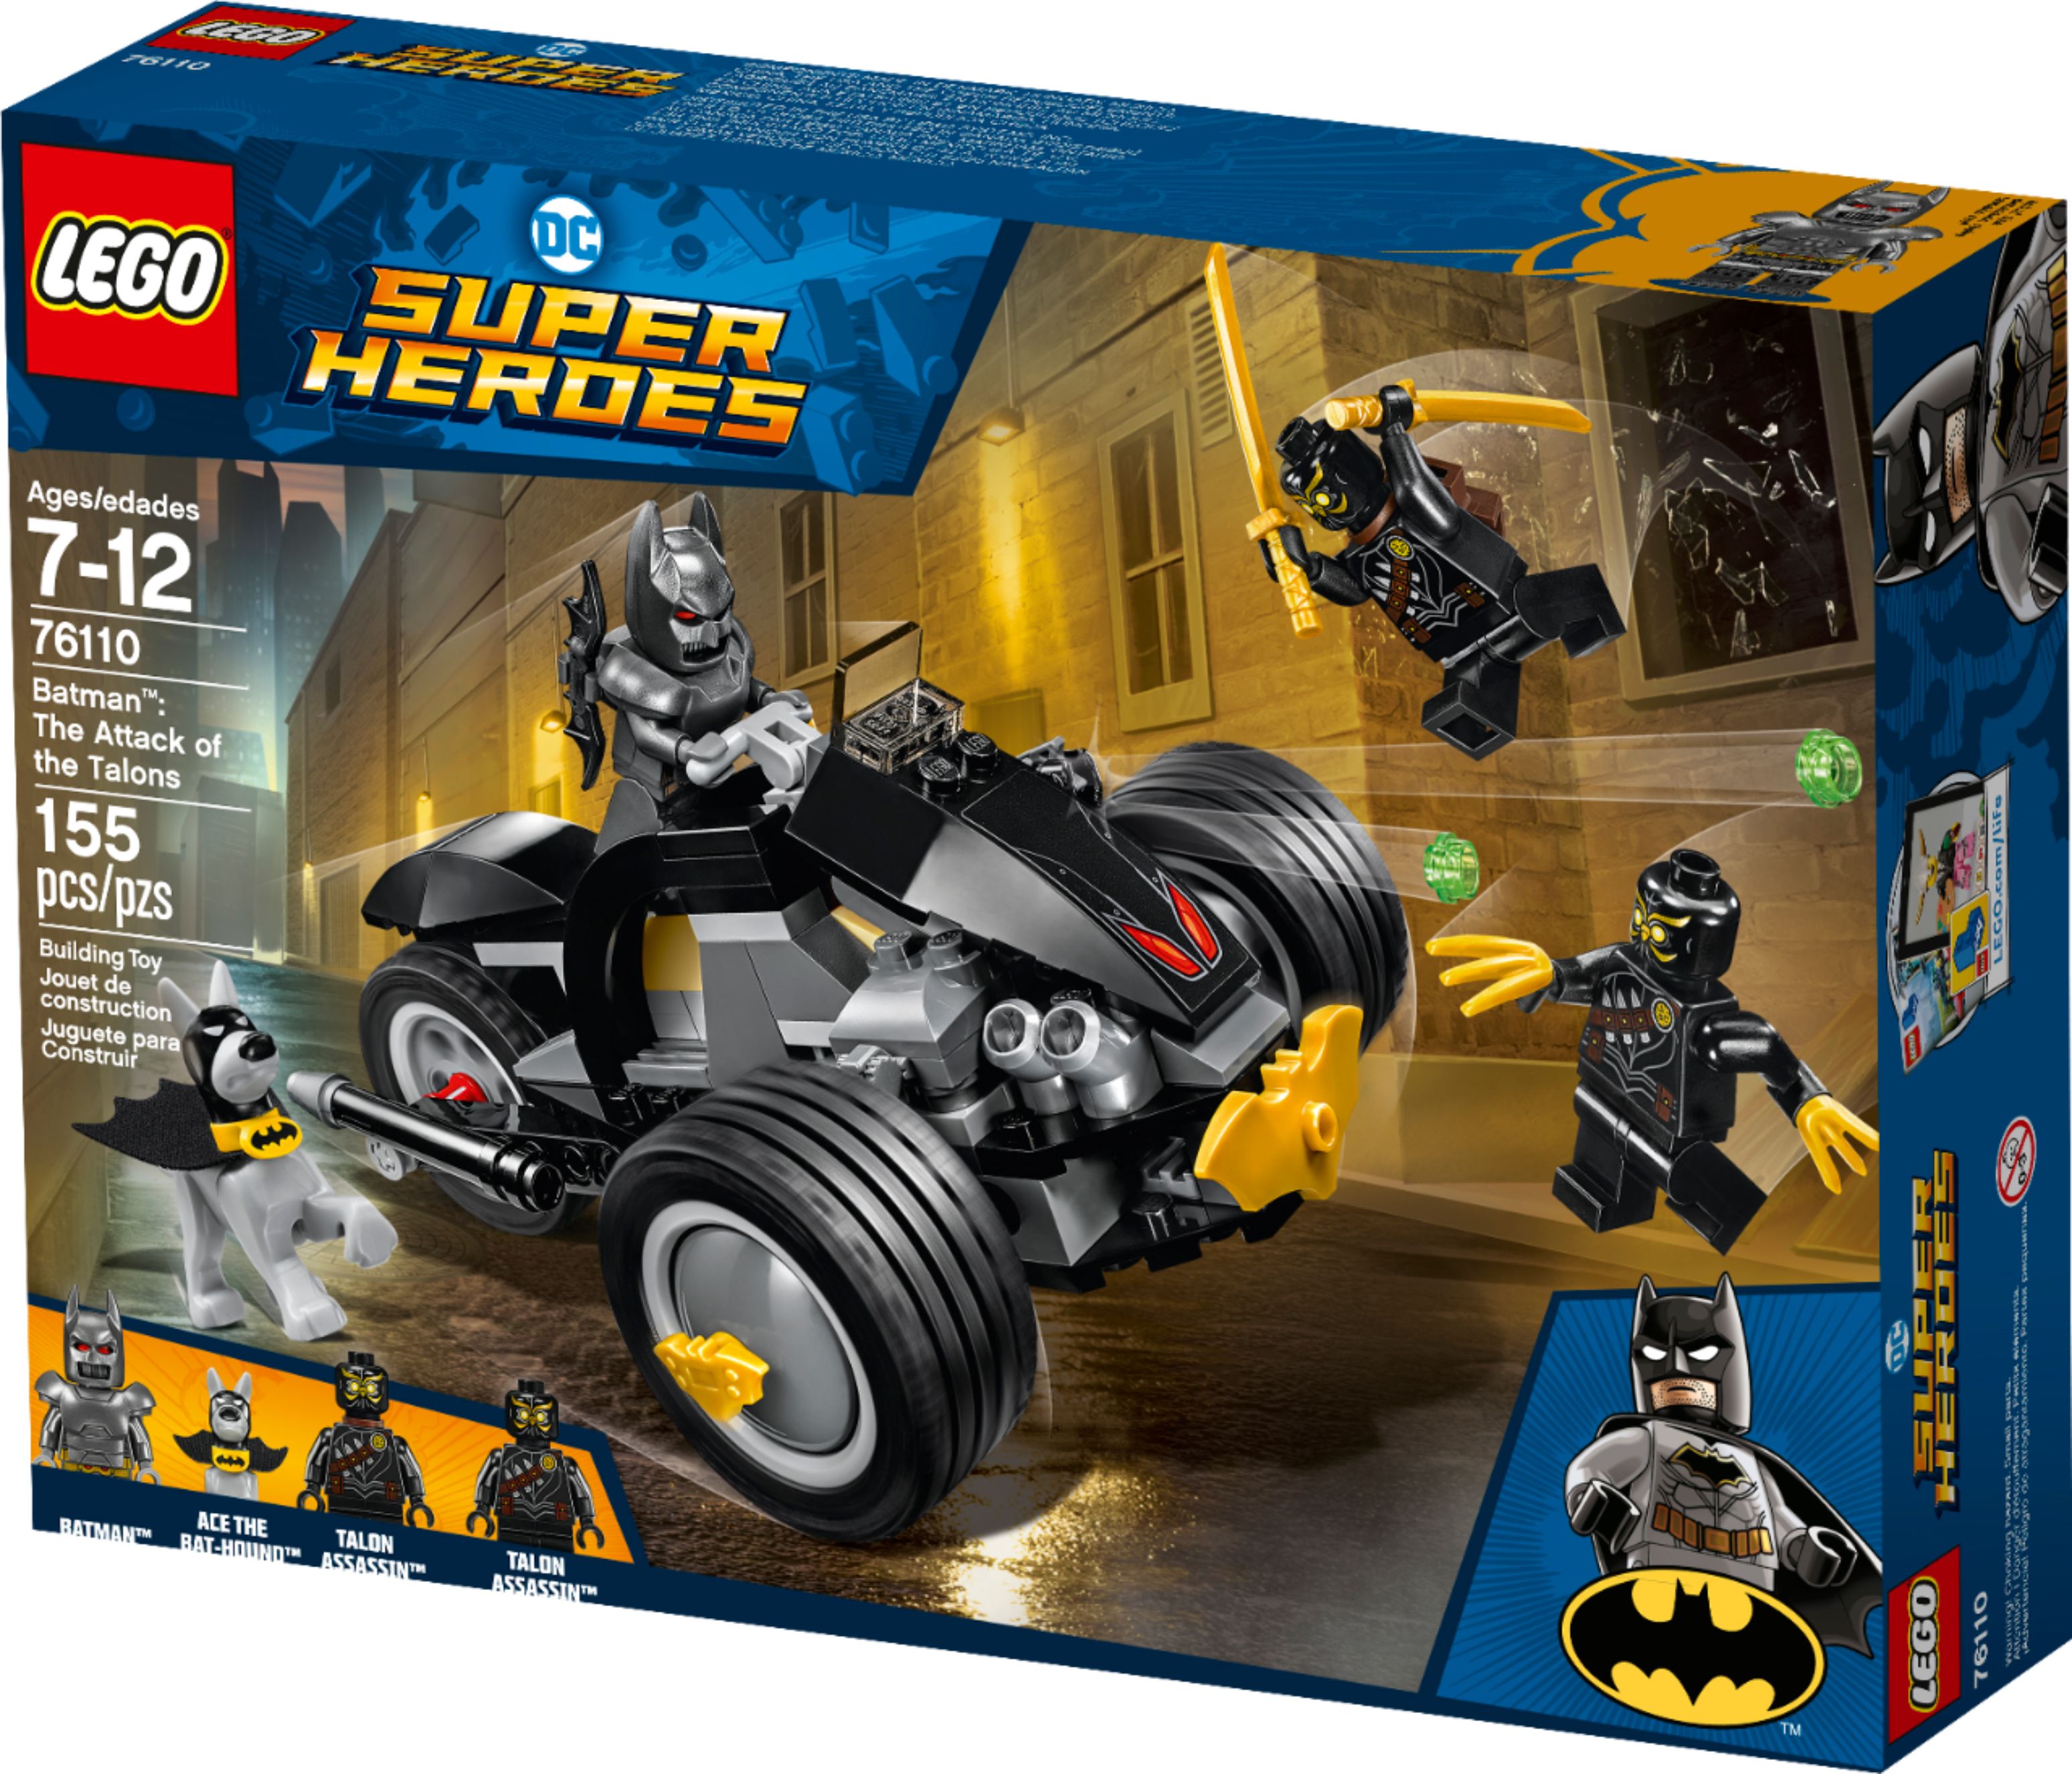 Forblive radiator overskud Best Buy: LEGO DC Super Heroes Batman: The Attack of the Talons 76110  6212591